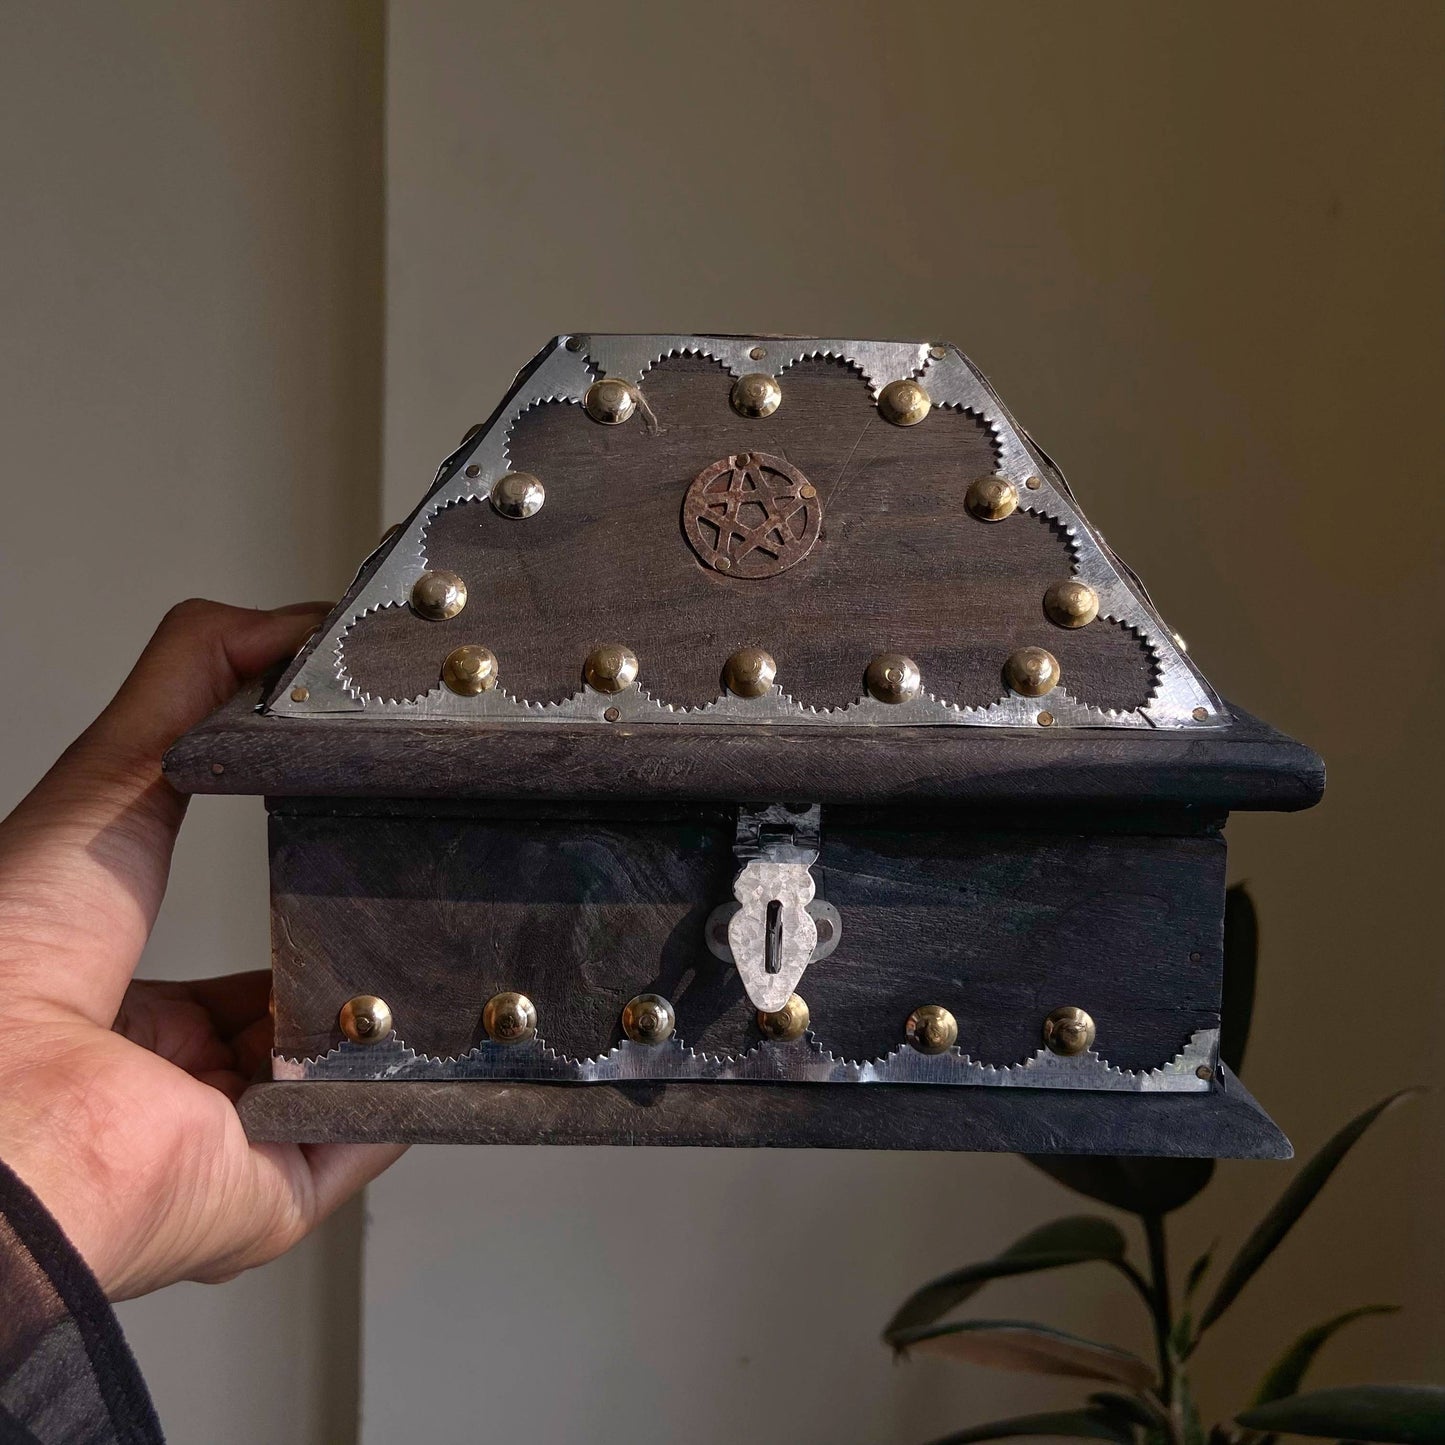 Black Vintage Wooden Chest | Religious Item, Crystal or Tarot cards